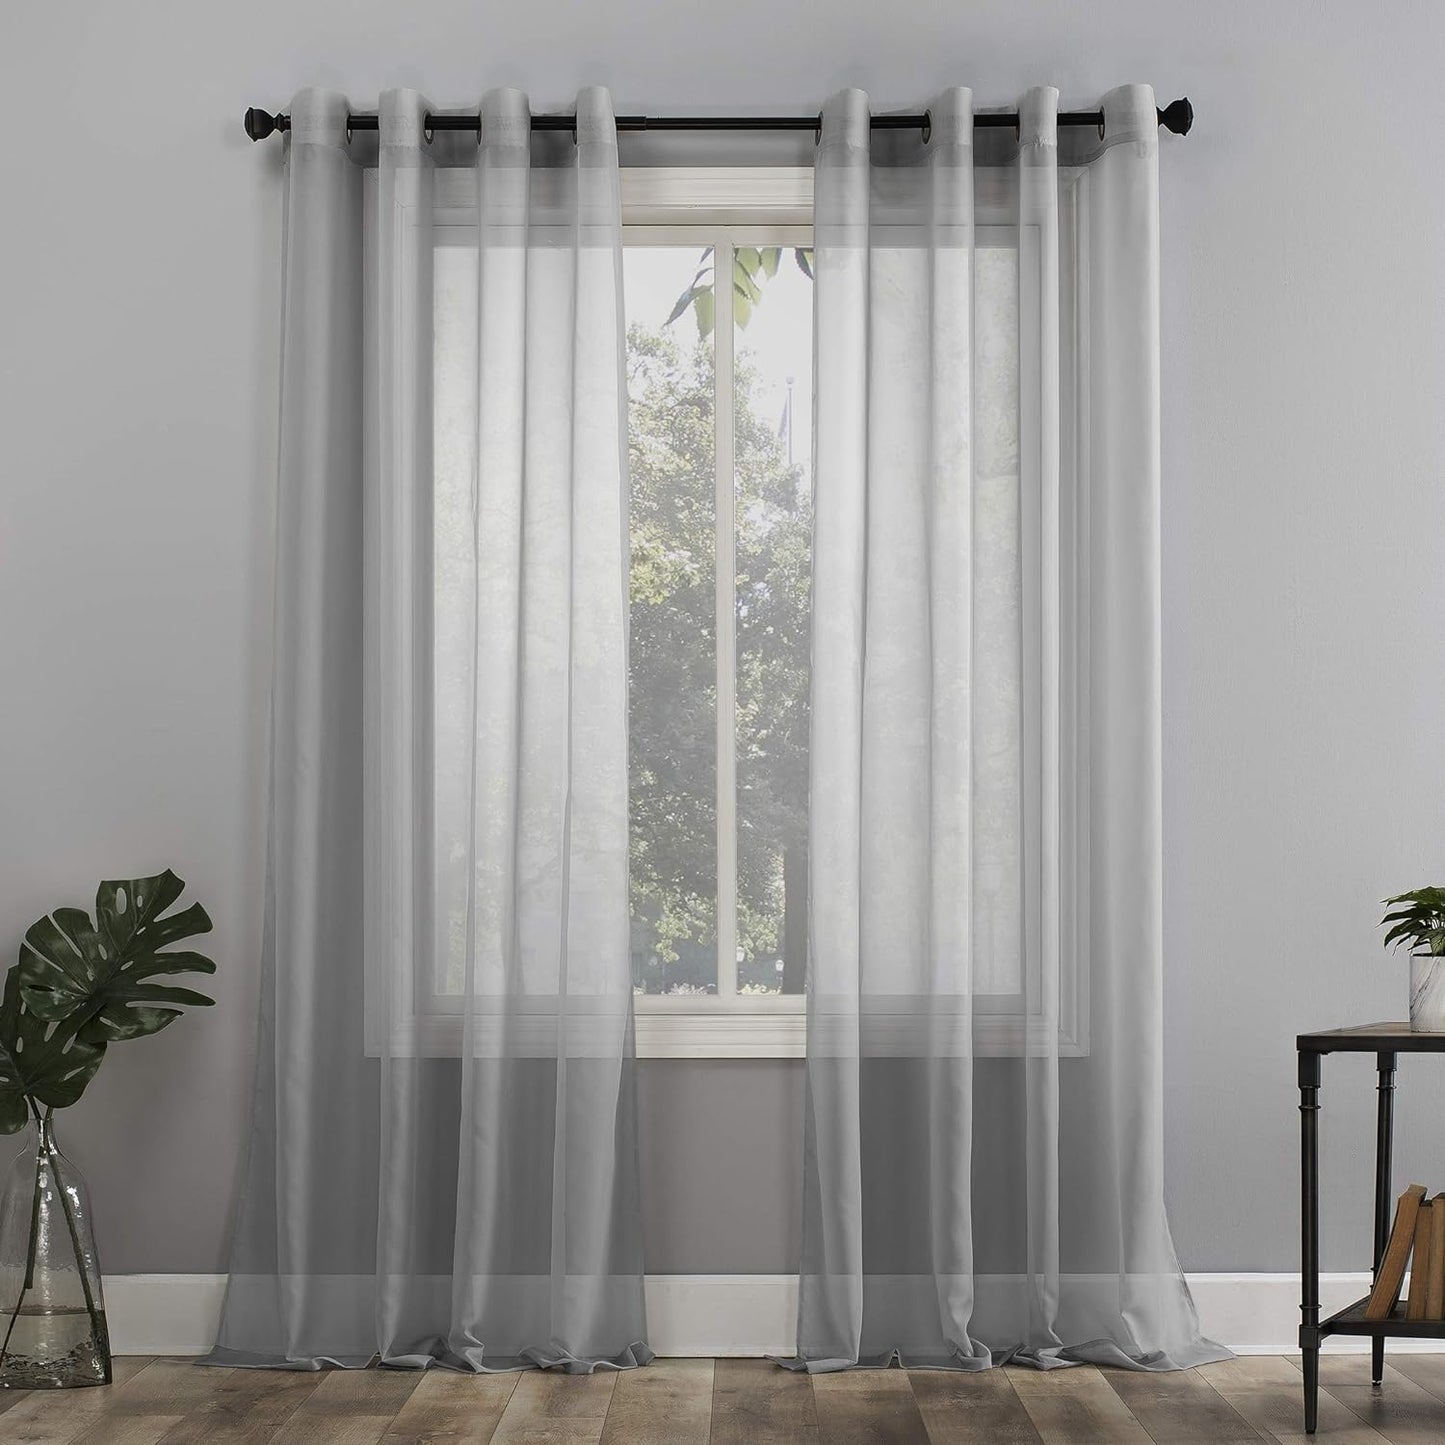 No. 918 Emily Sheer Voile Grommet Curtain Panel, 59" X 95", White  No. 918 Silver Gray Curtain Panel 59" X 95"